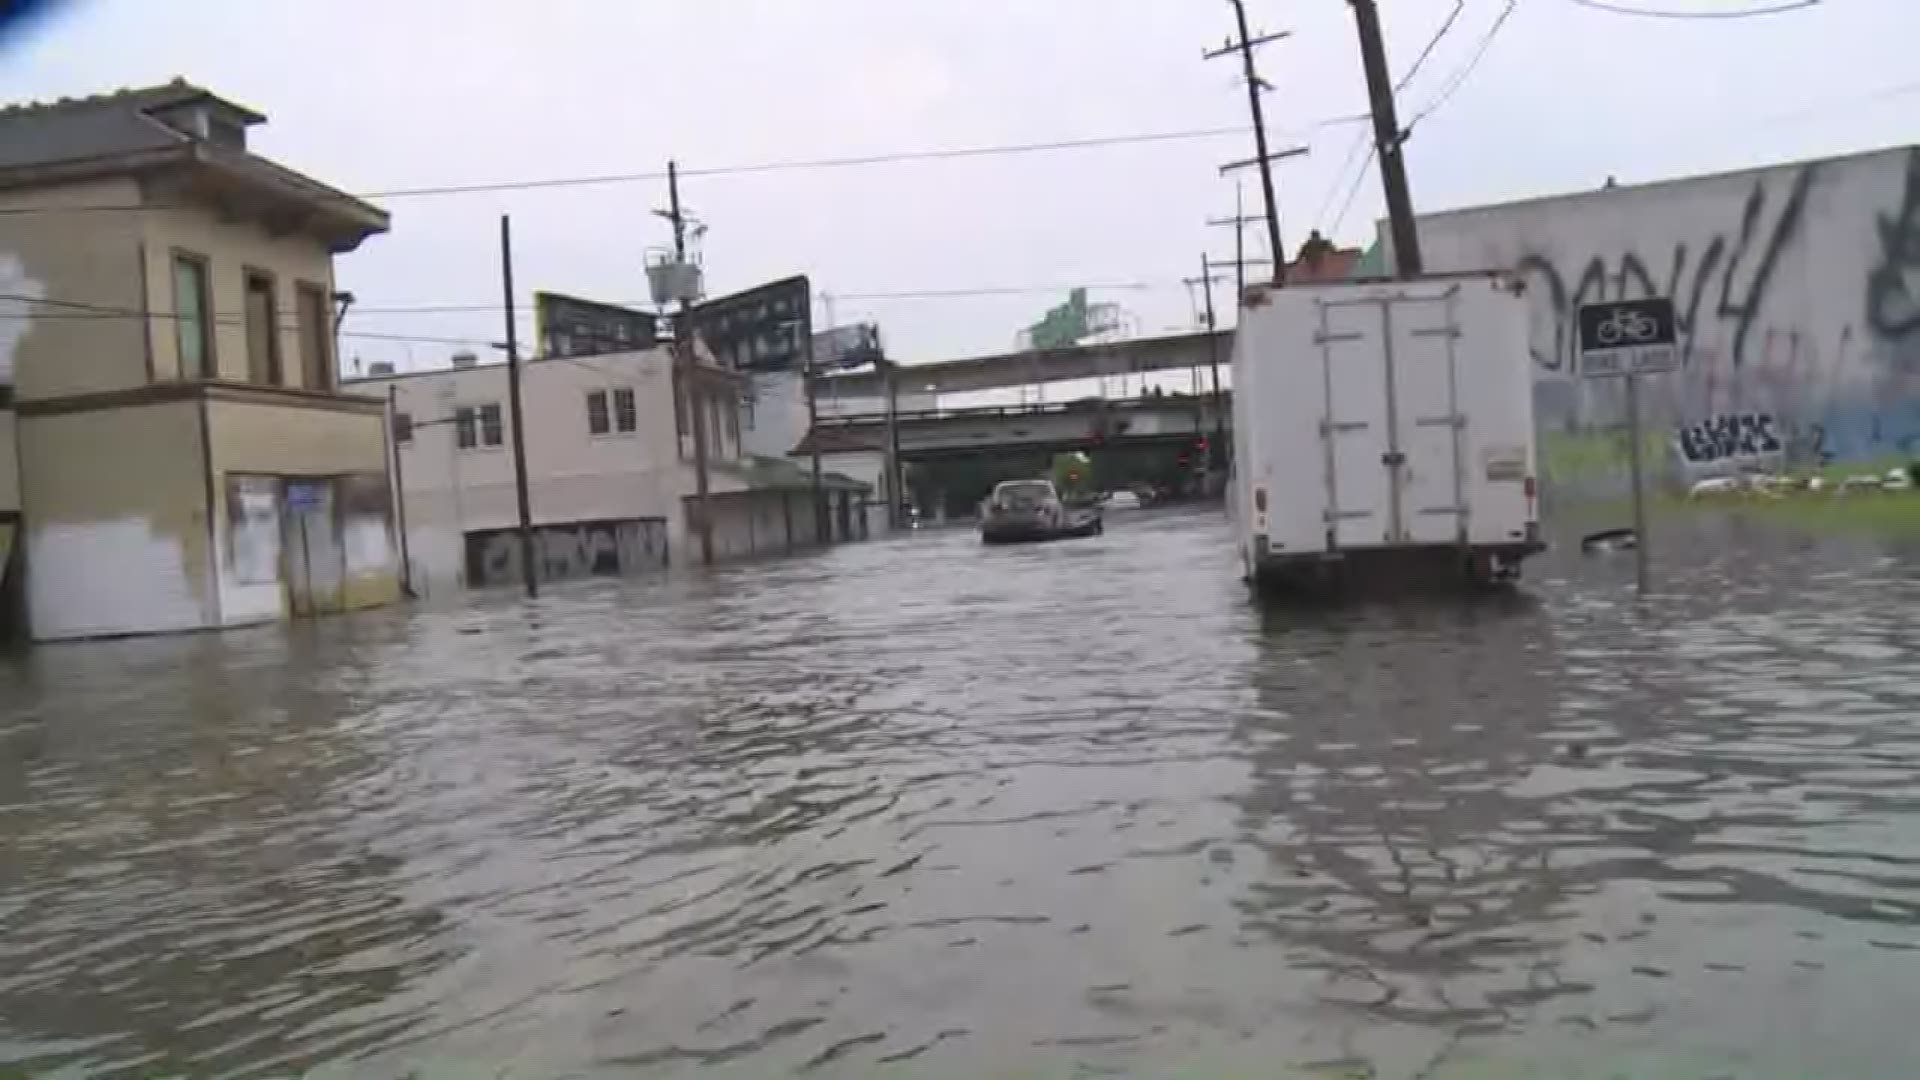 One man said the flooding was worse on his street on July 10, 2019 than it was during Hurricane Katrina. Several streets were flooded in the New Orleans area.